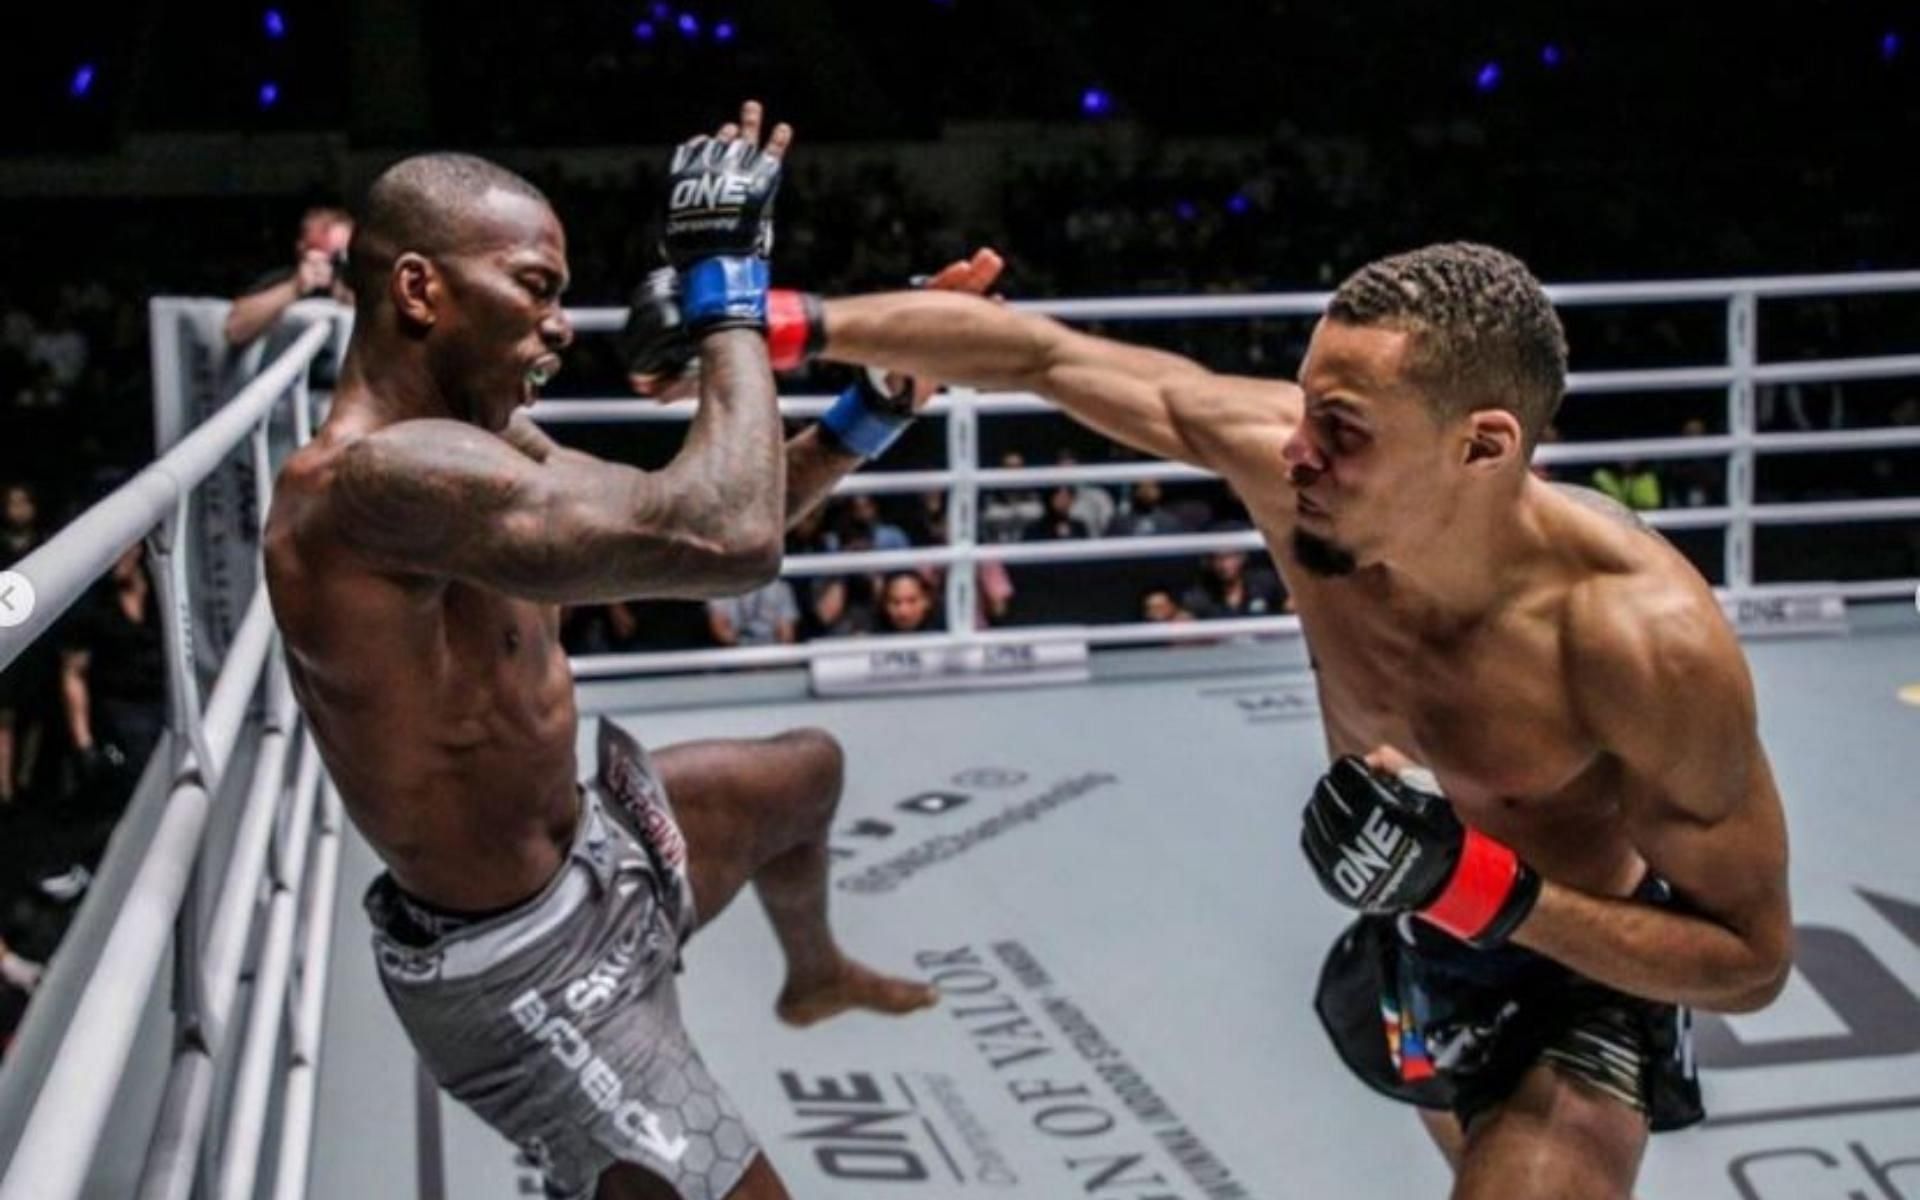 ONE Championship lightweight kickboxing champion Regian Eersel (right) returns at ONE: Winter Warriors. (Images Credits: @koolhydraat on Instagram)